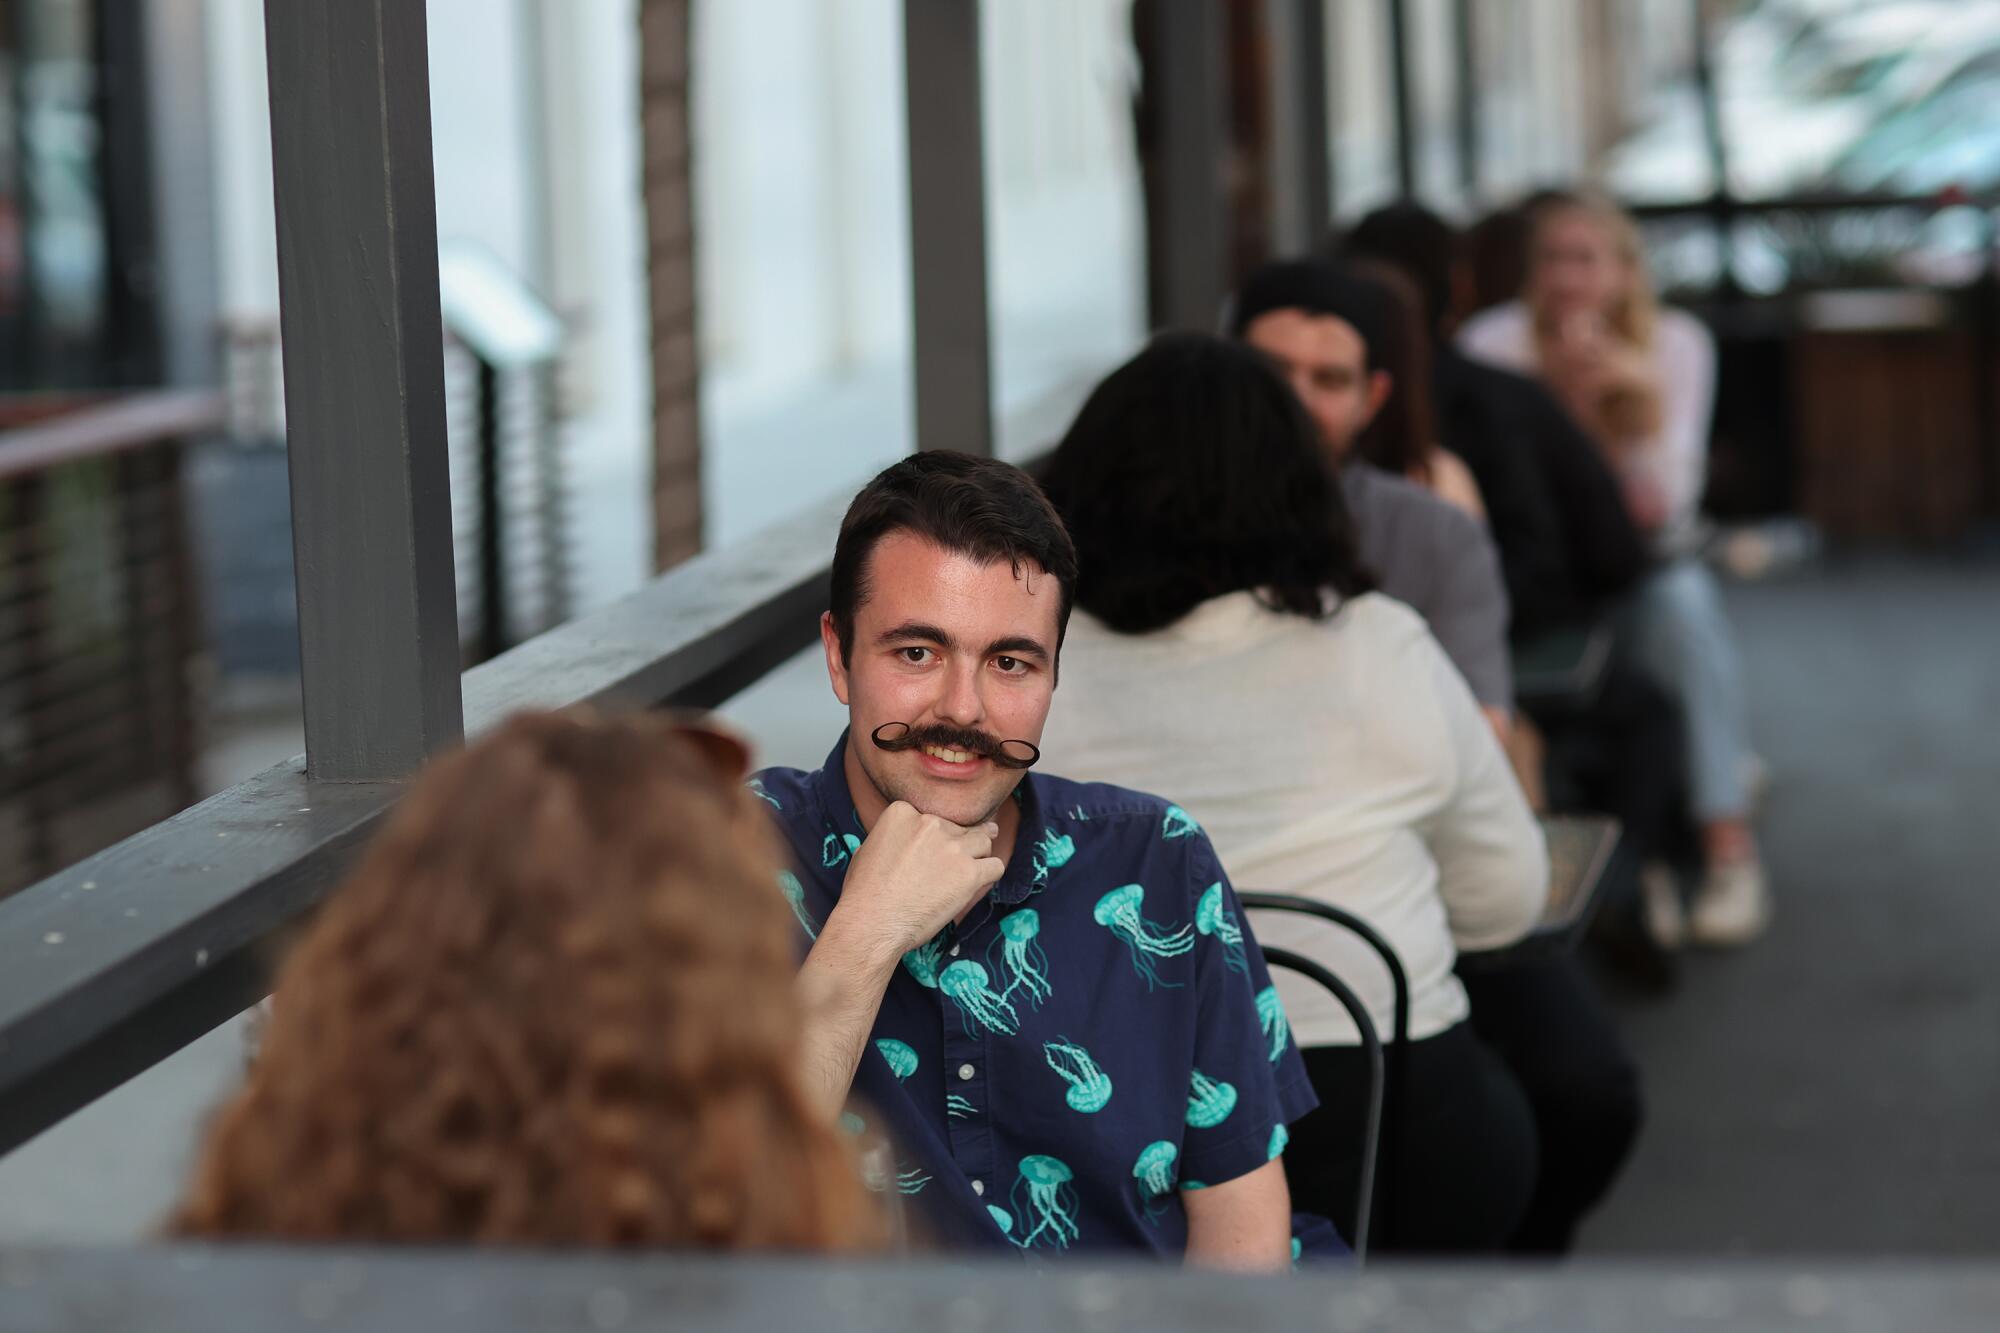 A mustached man facing the camera talks to a woman at a speed dating event.